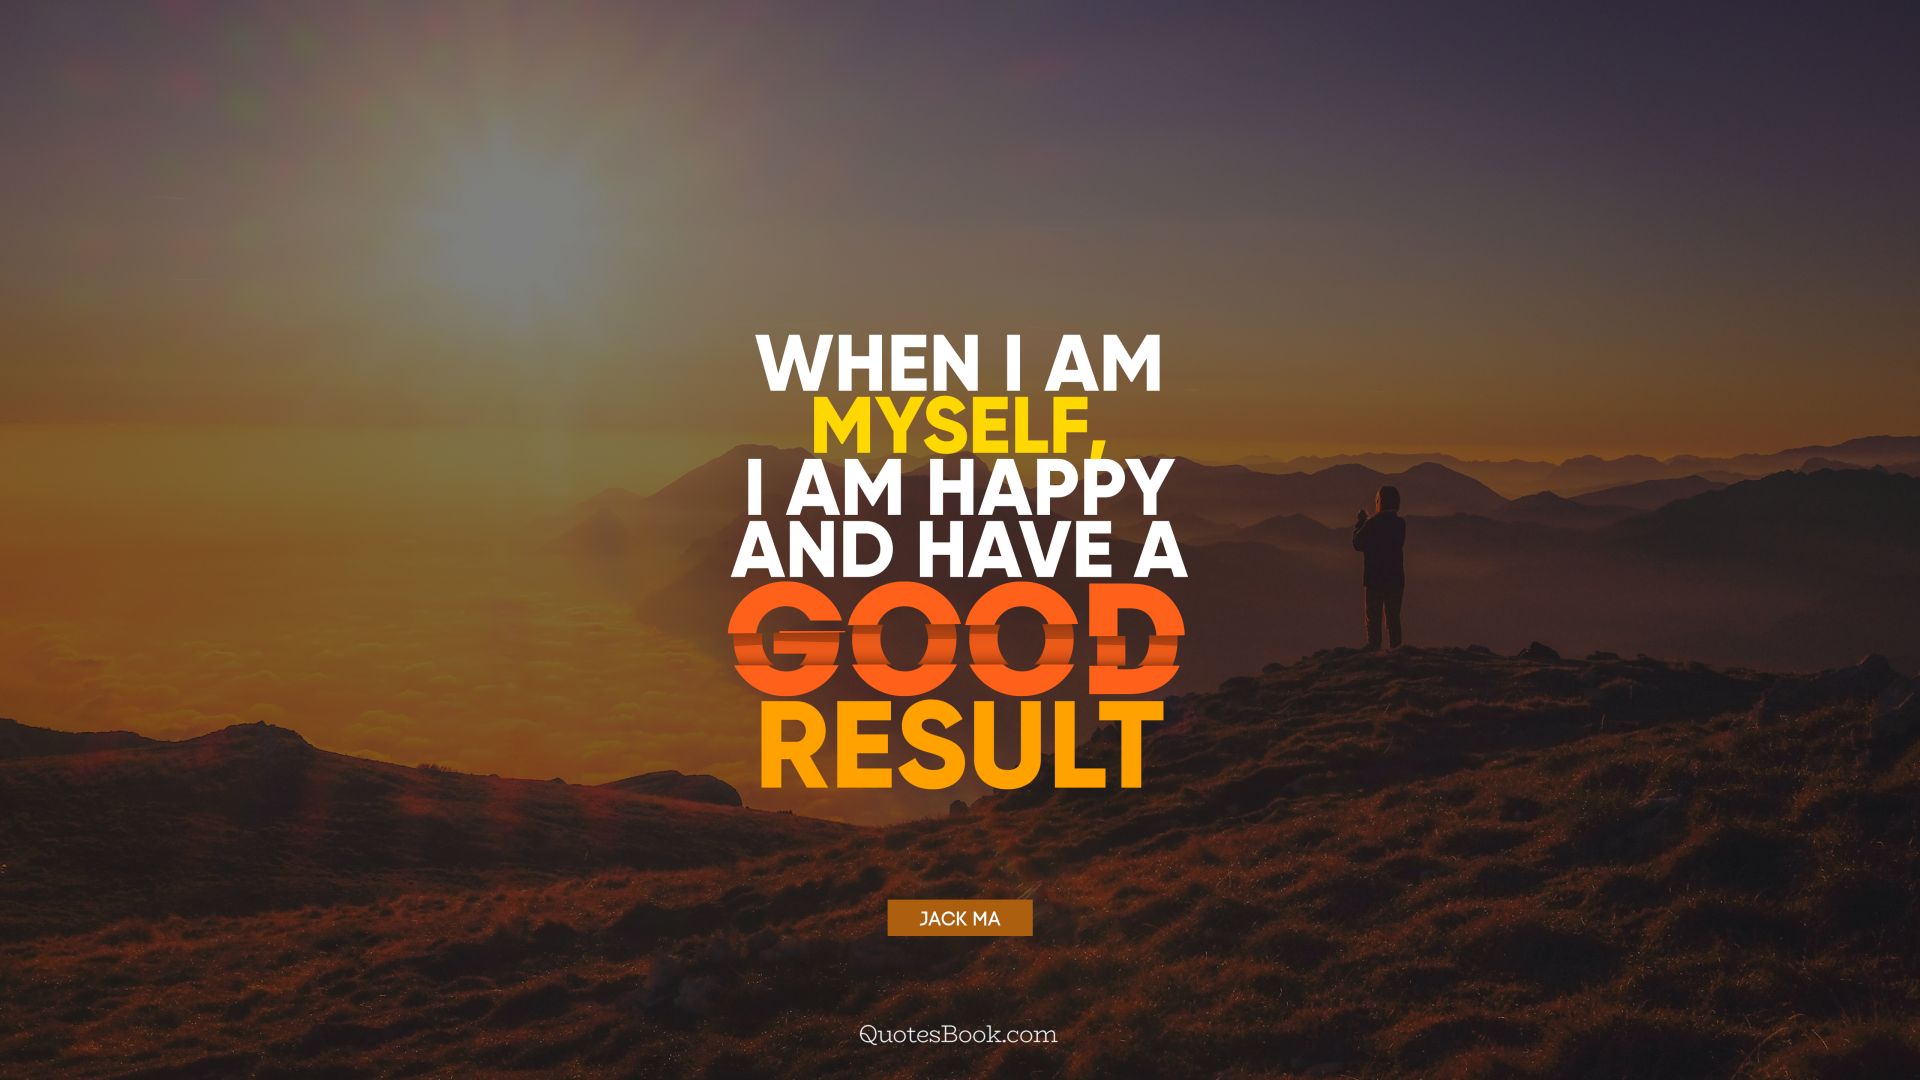 When I am myself, I am happy and have a good result. - Quote by Jack Ma